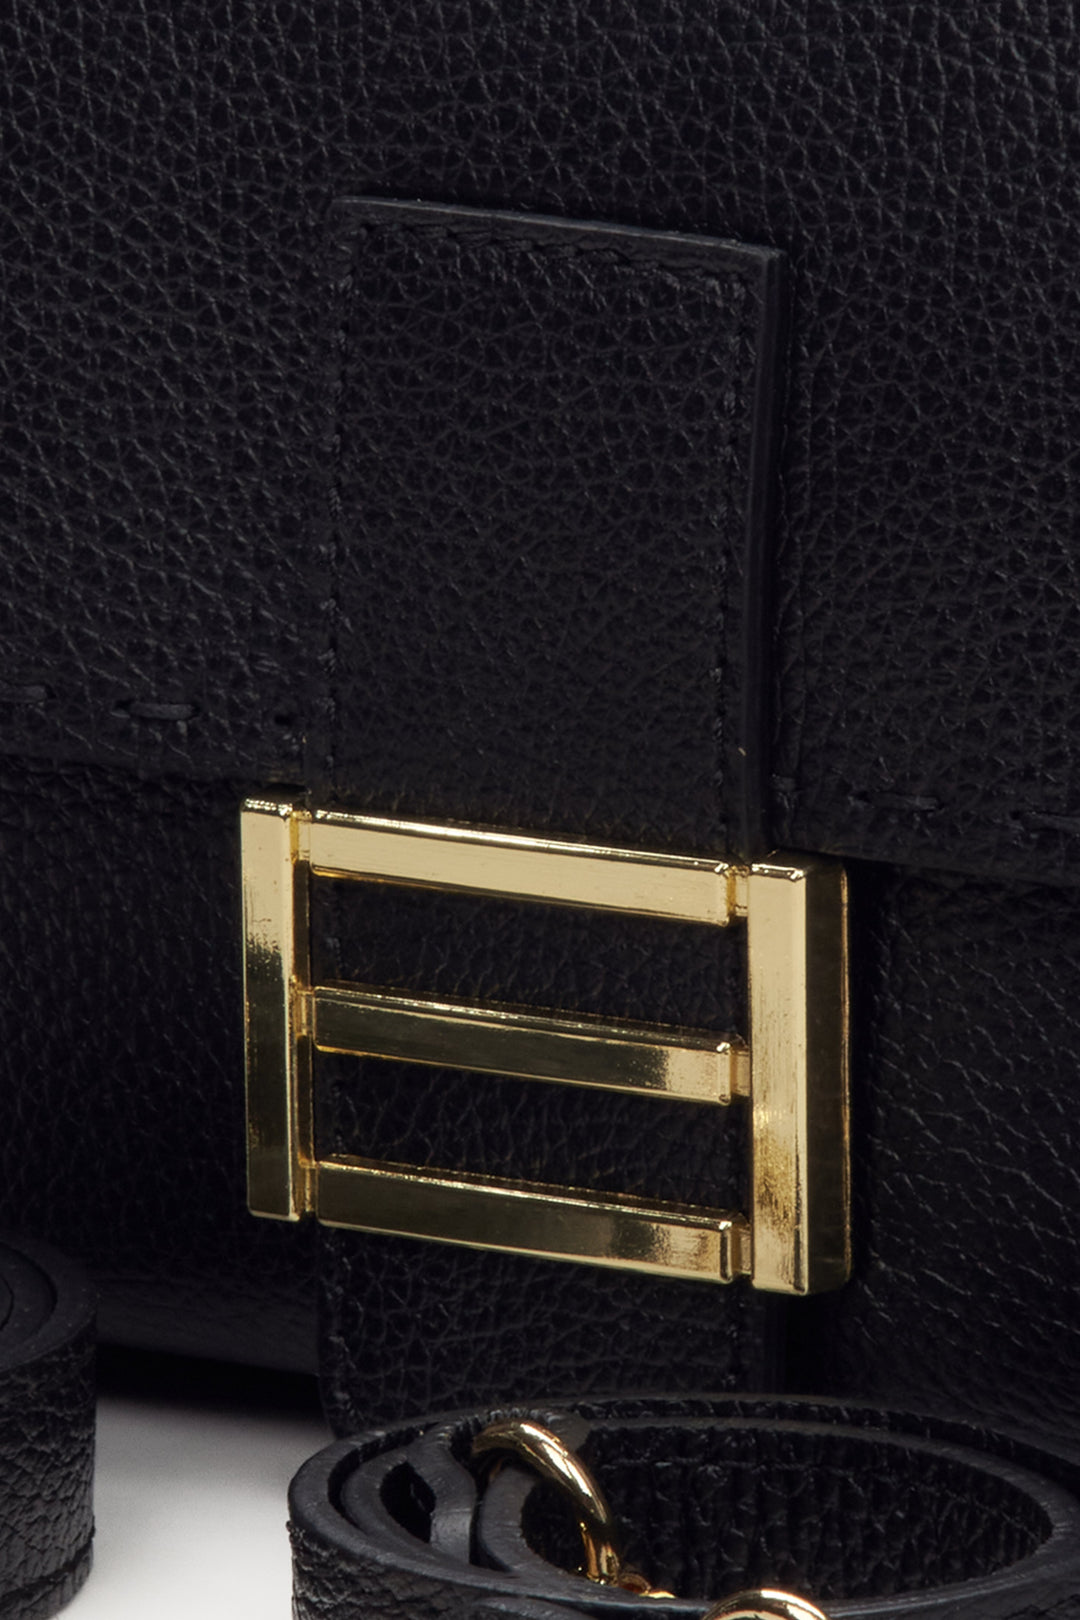 Women's handbag made of Italian genuine black leather with golden hardware - close-up on detail.